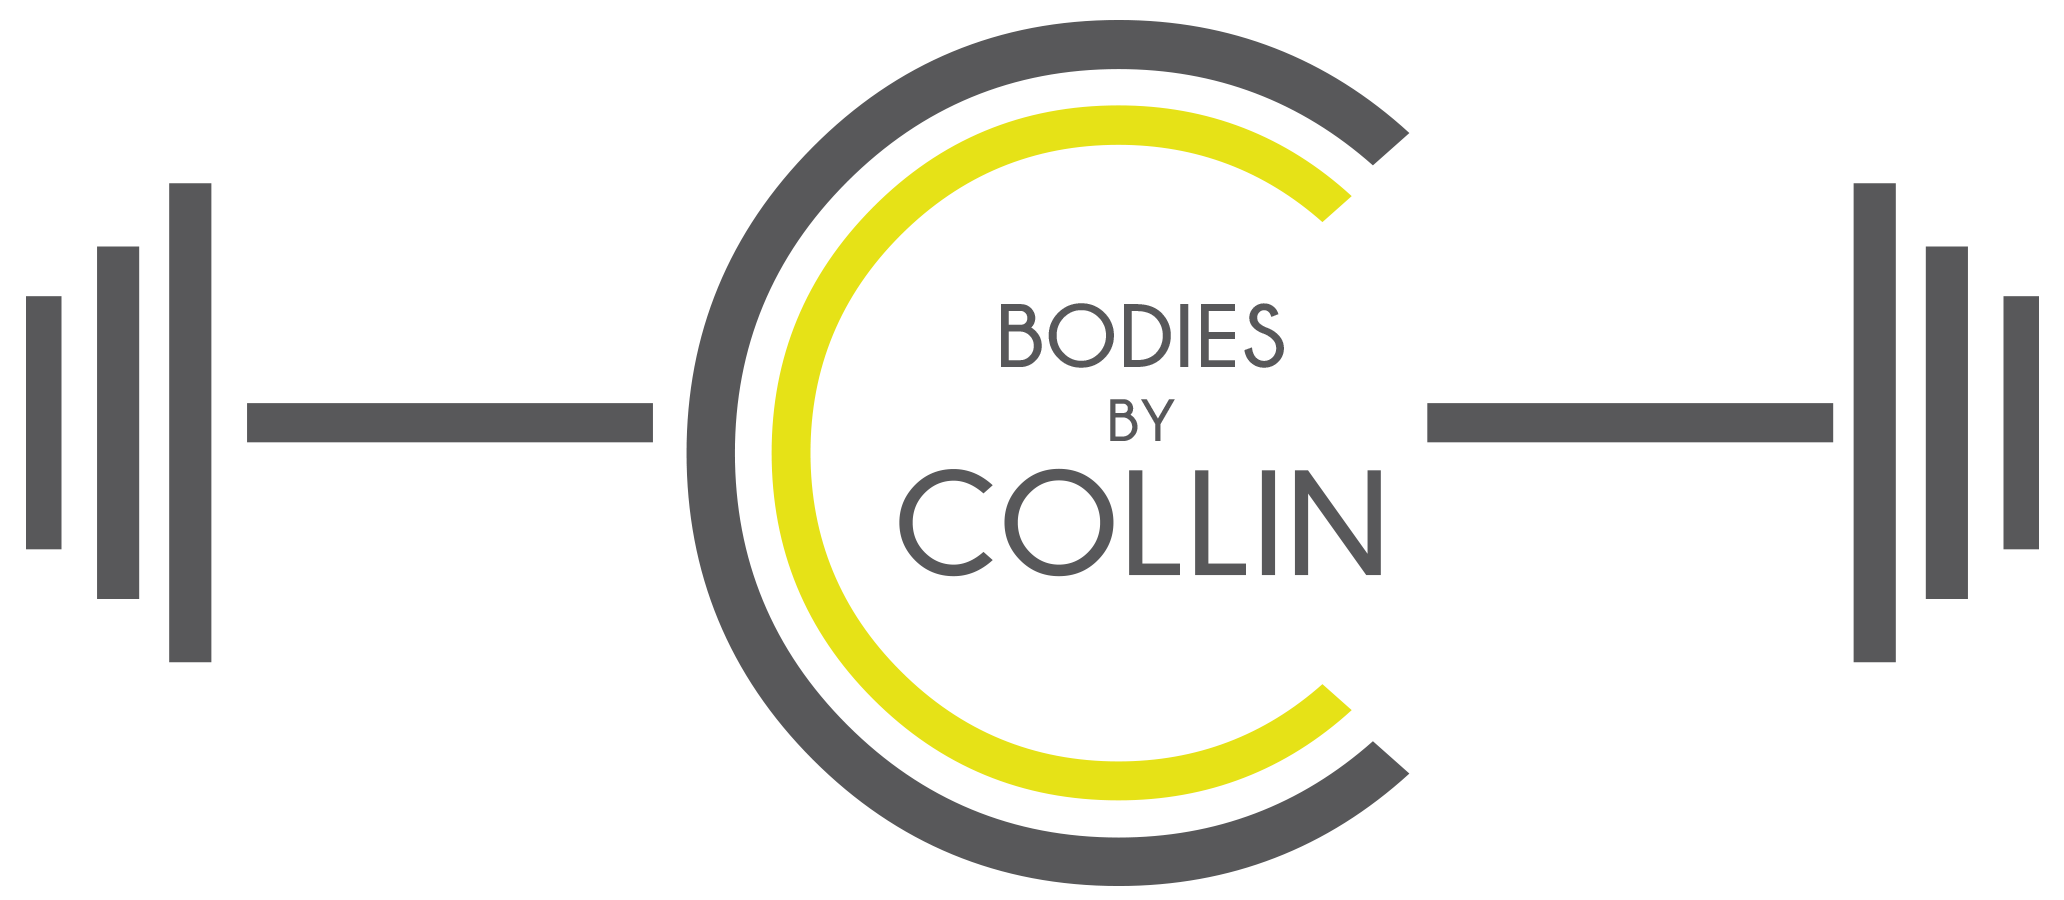 Bodies by Collin